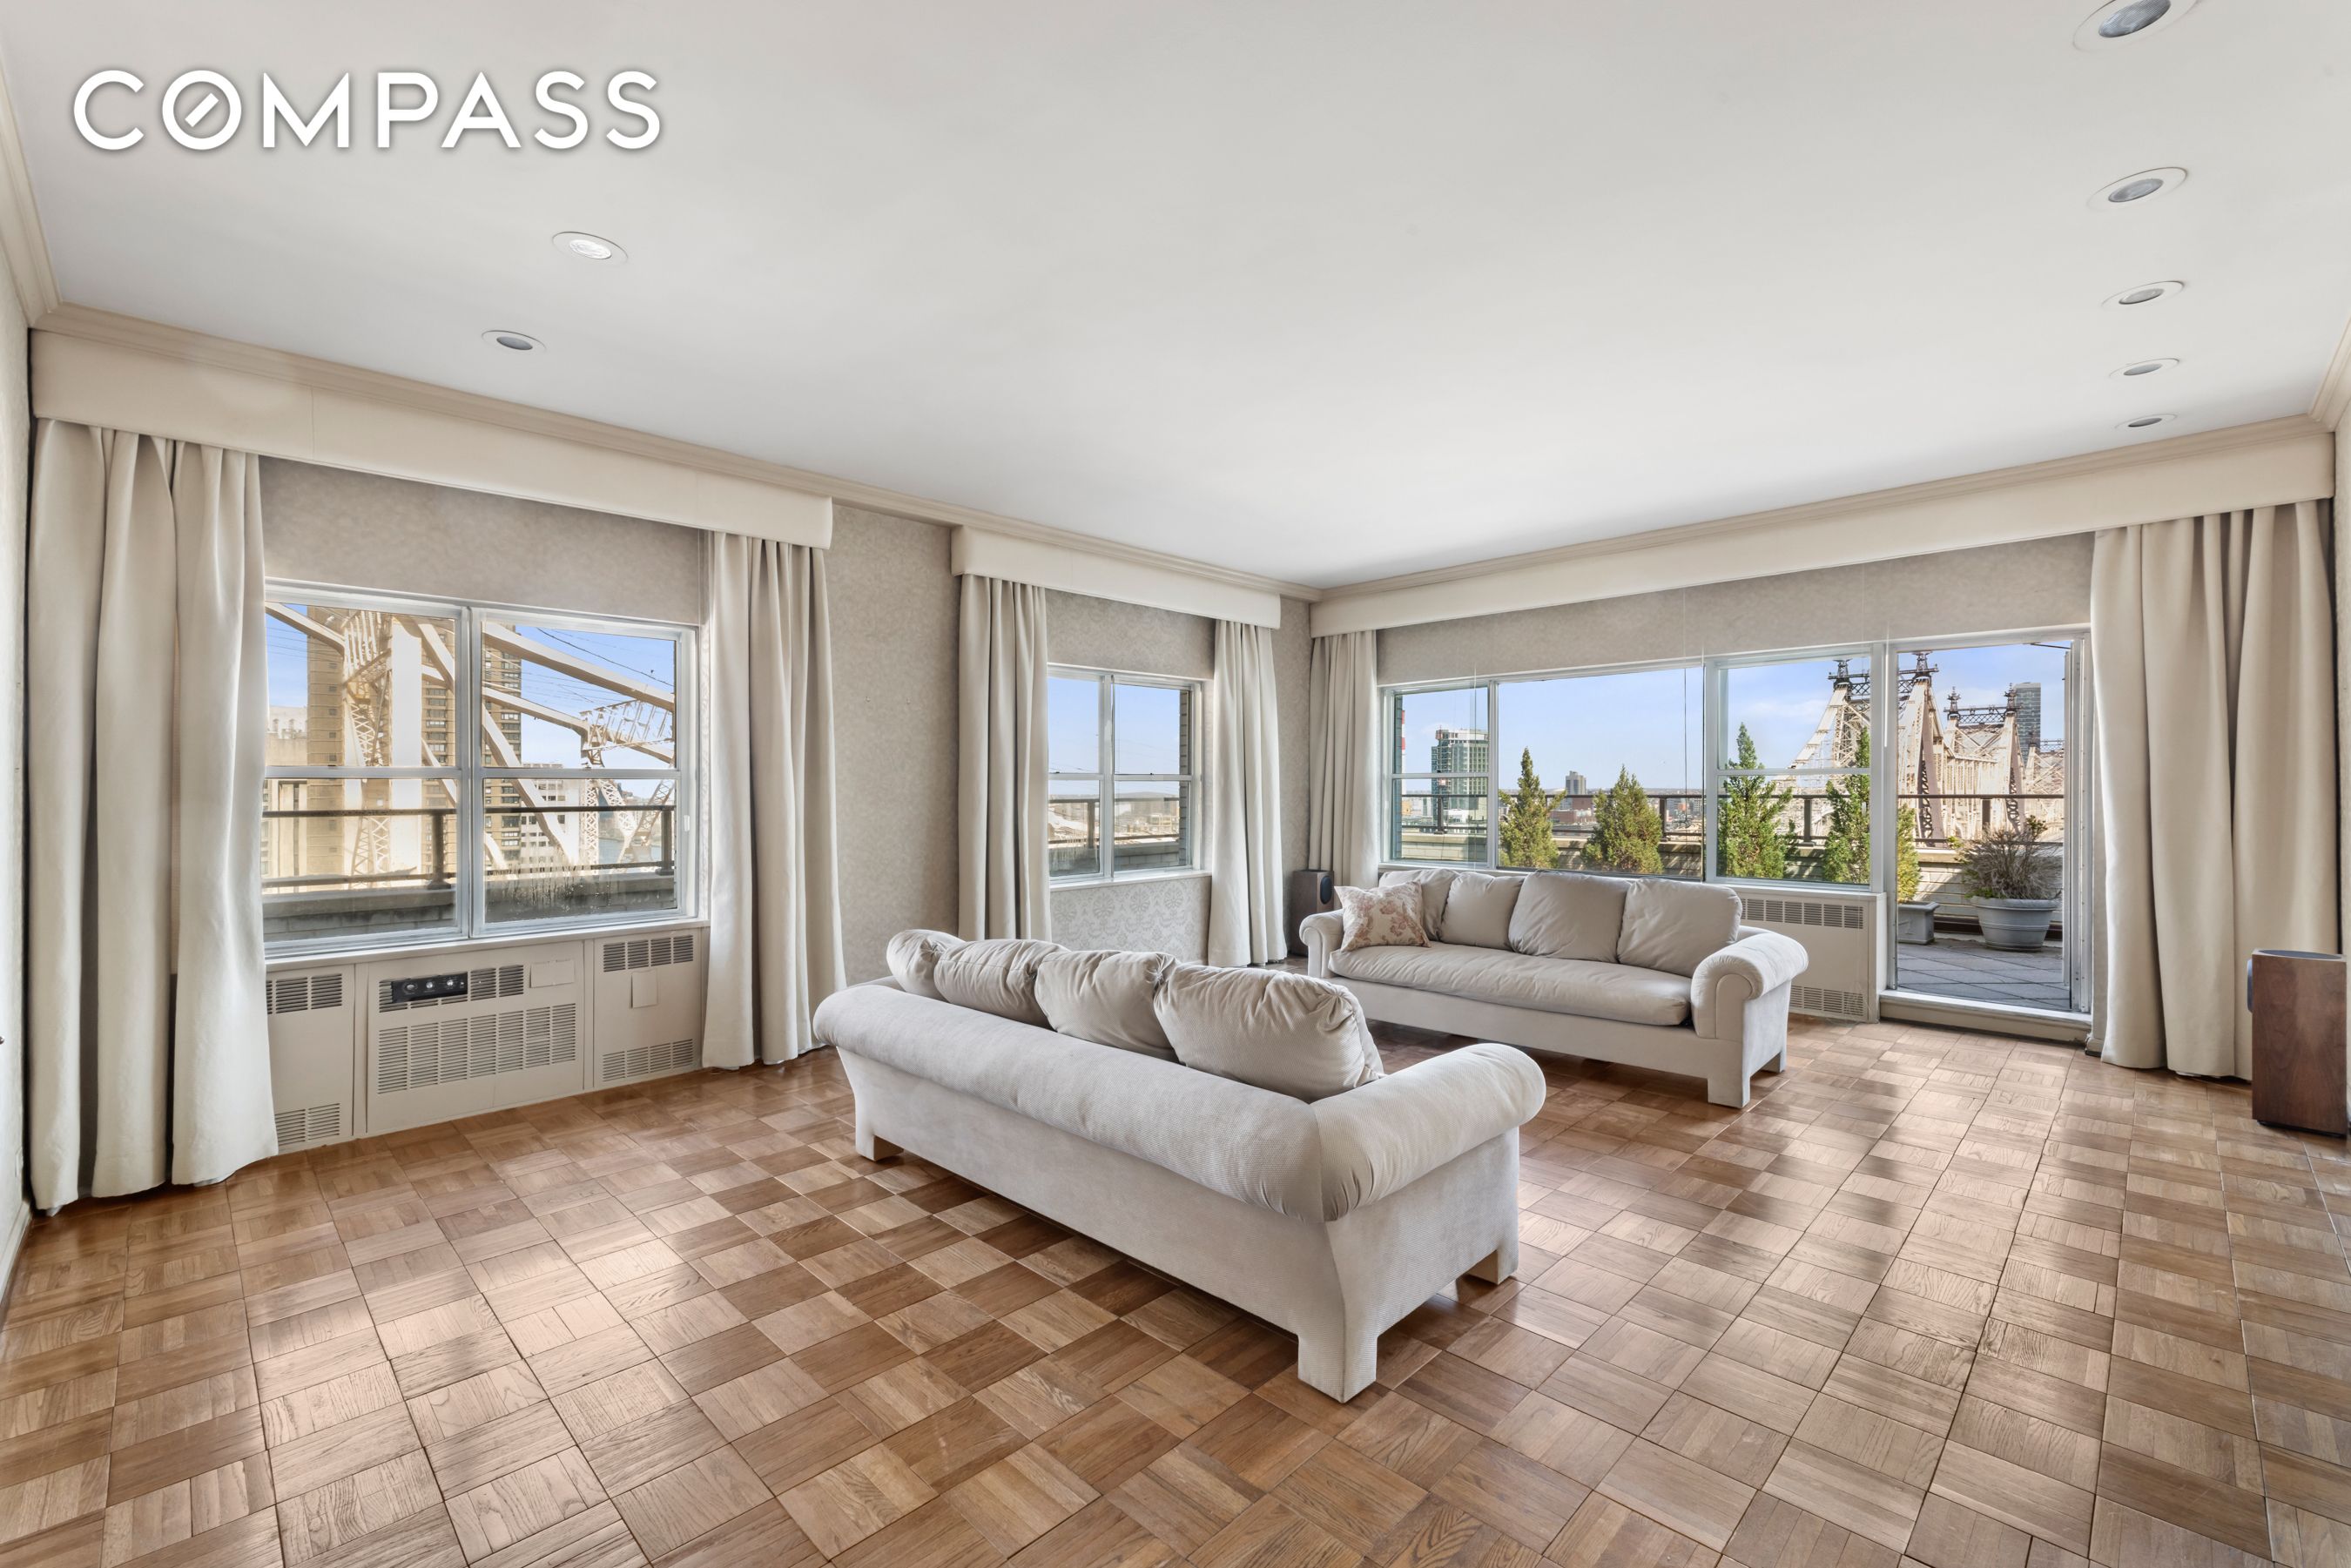 35 Sutton Place Phb, Sutton Place, Midtown East, NYC - 1 Bedrooms  
1.5 Bathrooms  
3 Rooms - 